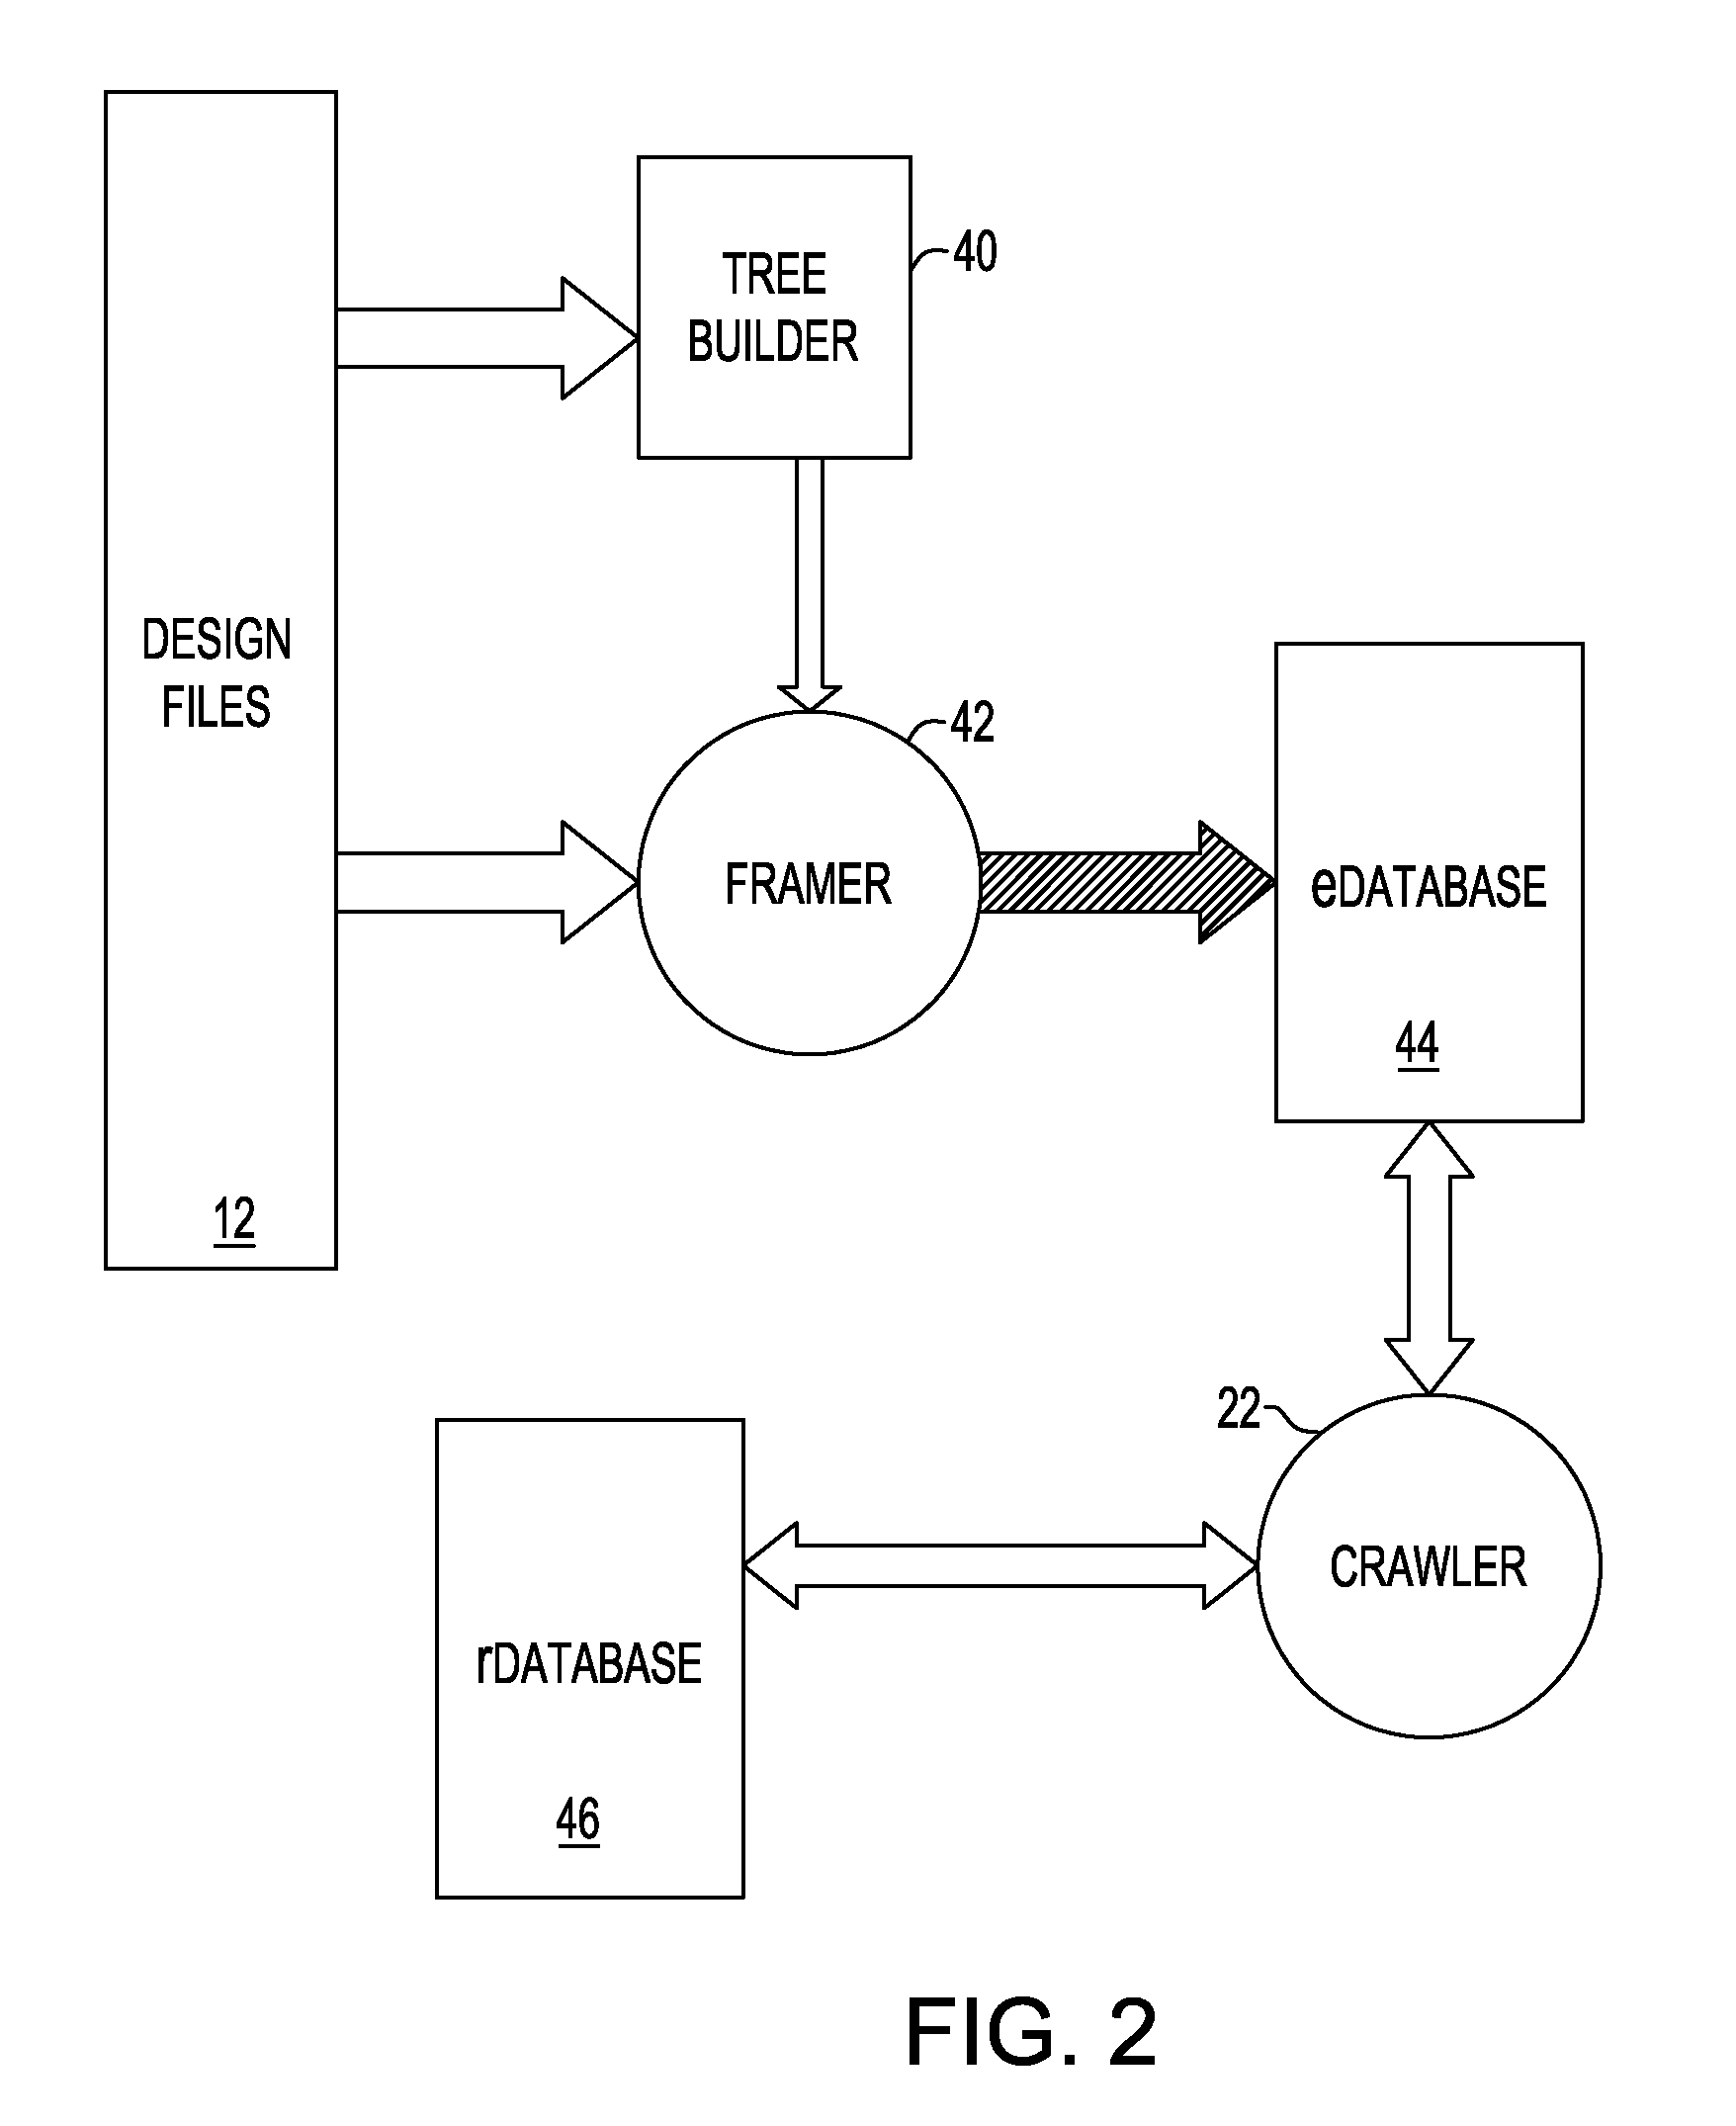 Method and system for automatically accessing internal signals or ports in a design hierarchy